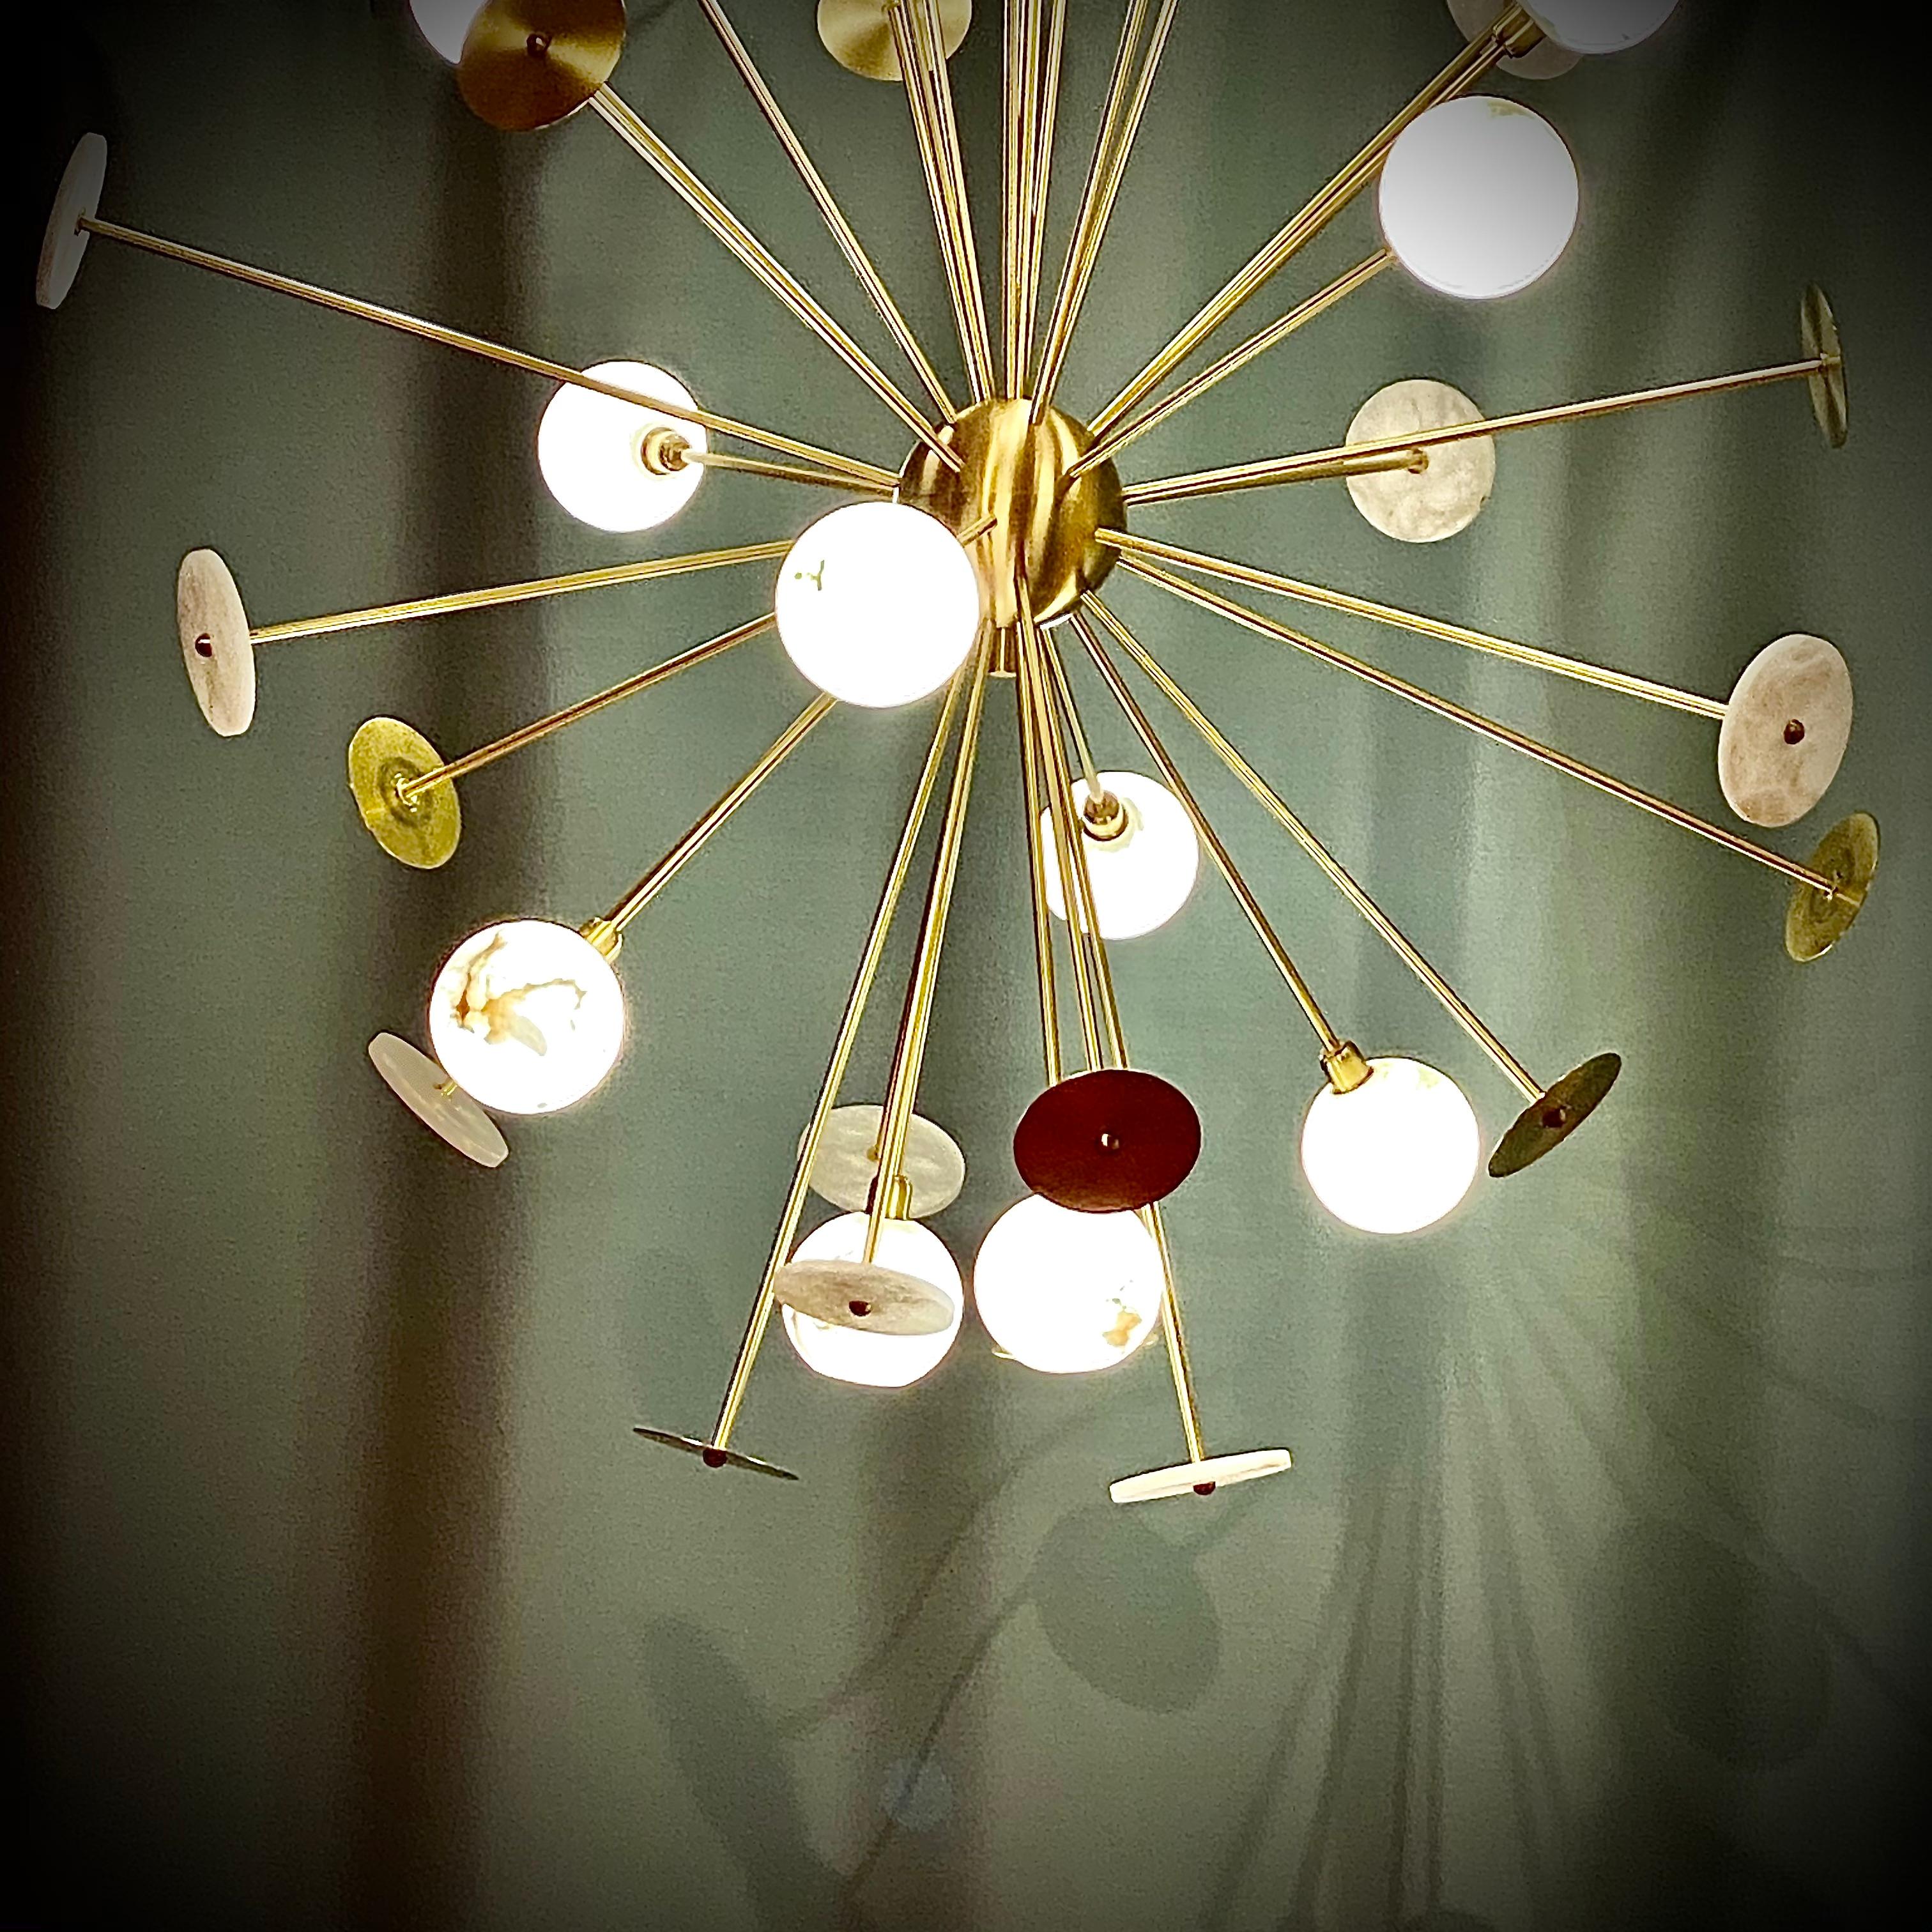 Cosulich Interiors & Antiques in collaboration with Matlight - Milan: this bespoke sputnik chandelier, entirely handcrafted in Italy, is an explosion of light and reflections, pleasing the eye with flat and round shapes as well as by the use of